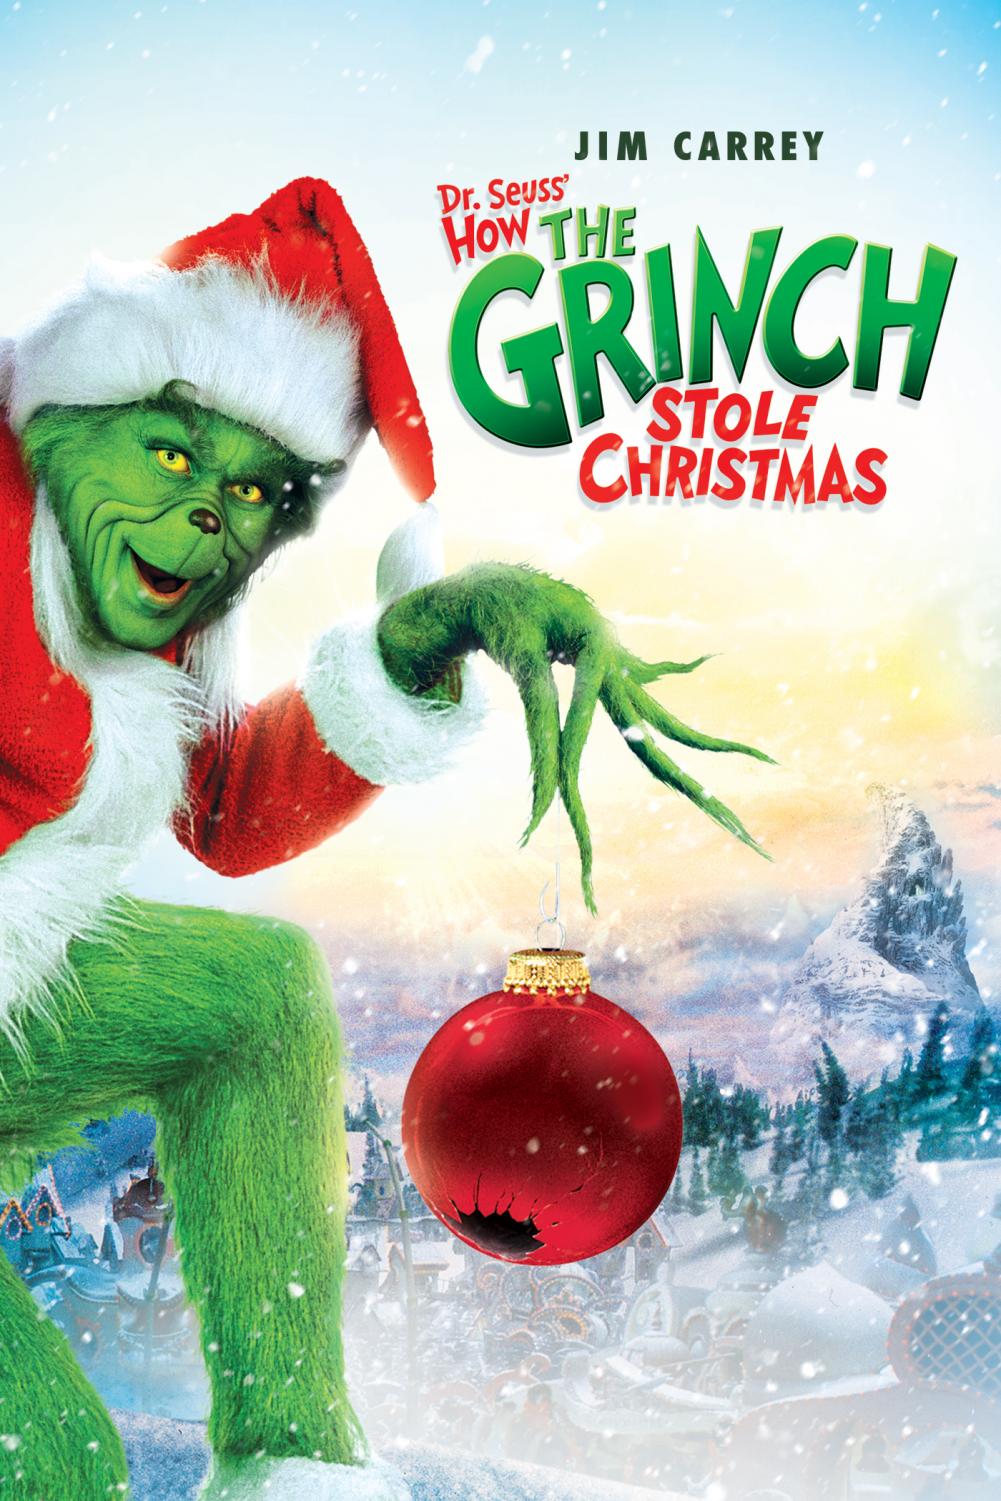 https://ghsnews1.com/wp-content/uploads/2021/01/How-The-Grinch-Stole-Christmas-Pic.jpeg